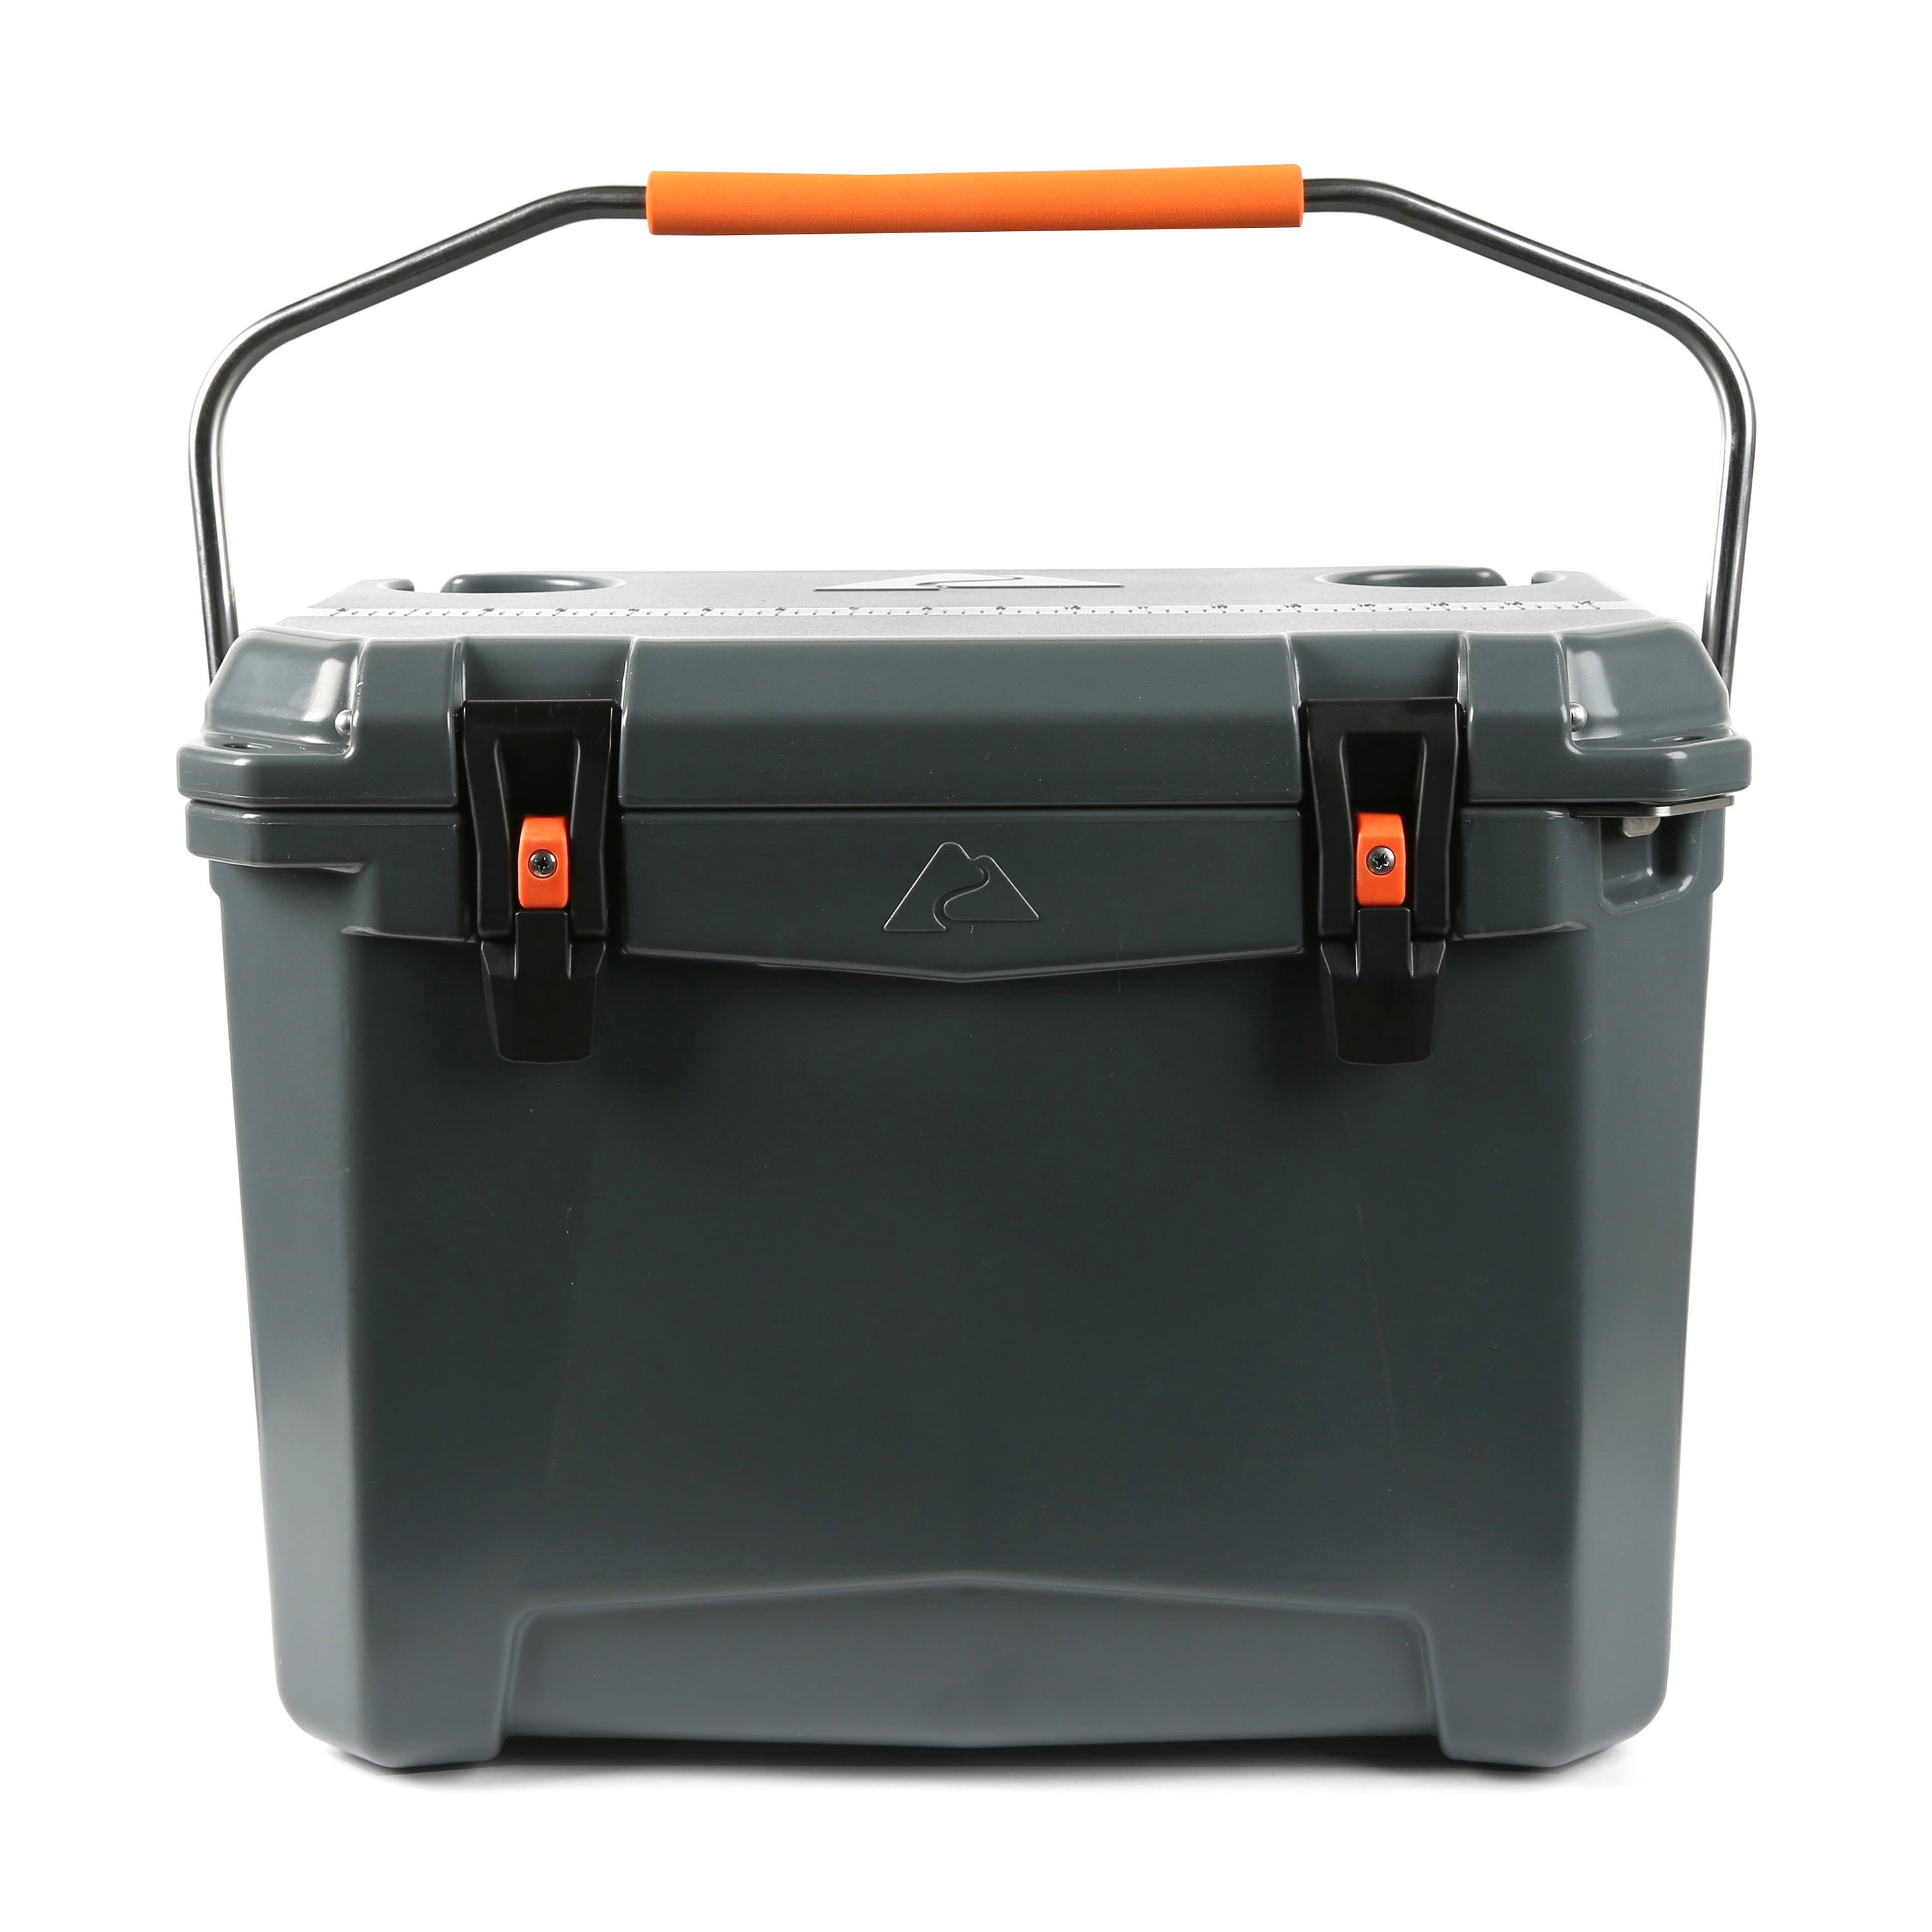 Ozark Trail 26 Quart High Performance Roto-Molded Cooler with Microban